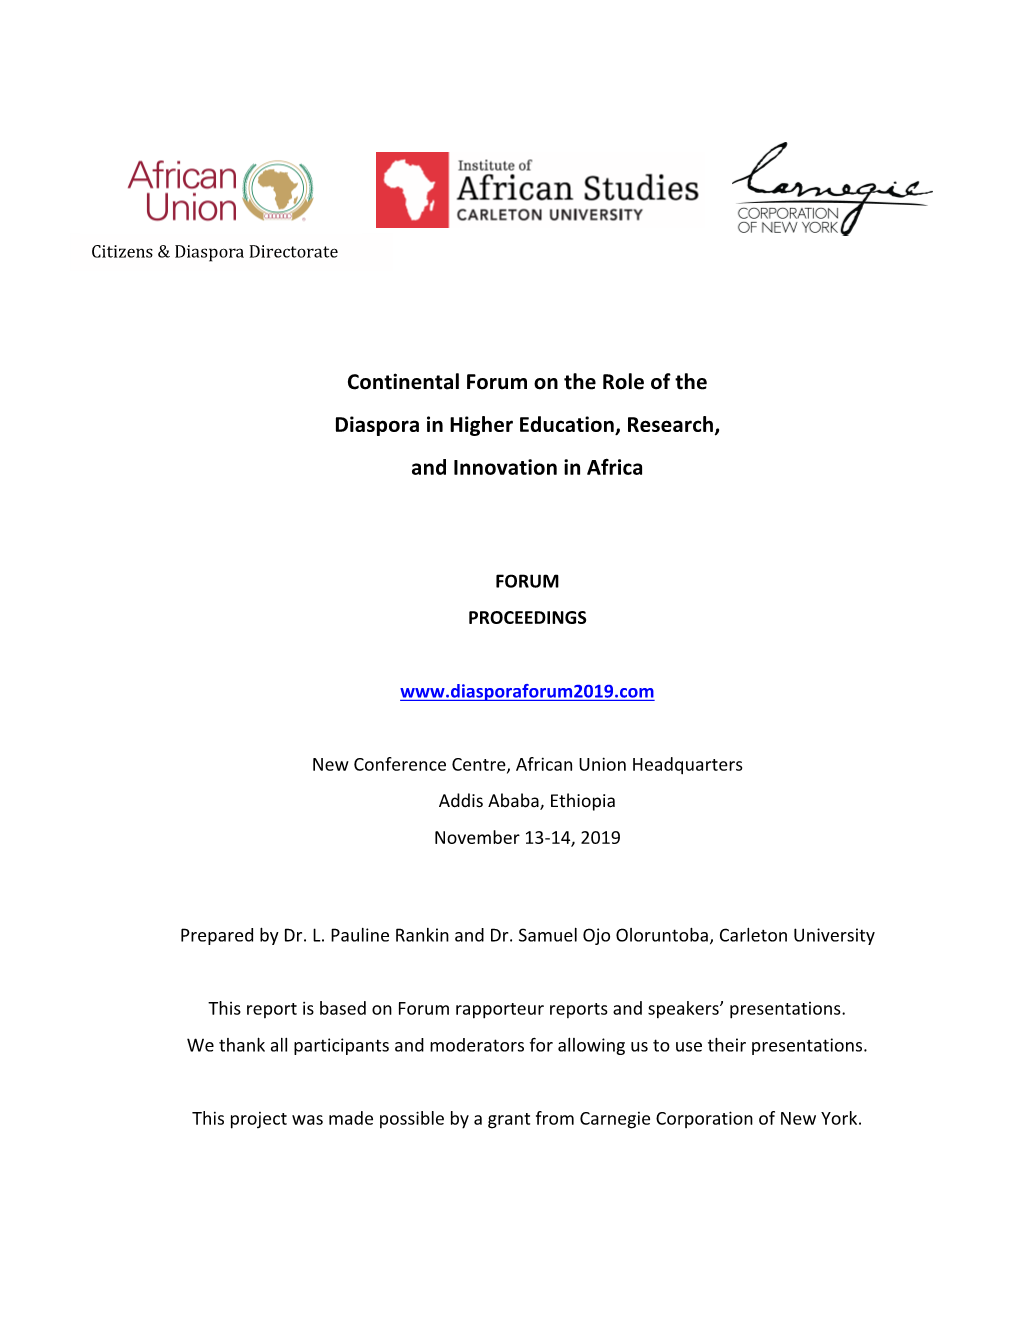 Continental Forum on the Role of the Diaspora in Higher Education, Research, and Innovation in Africa